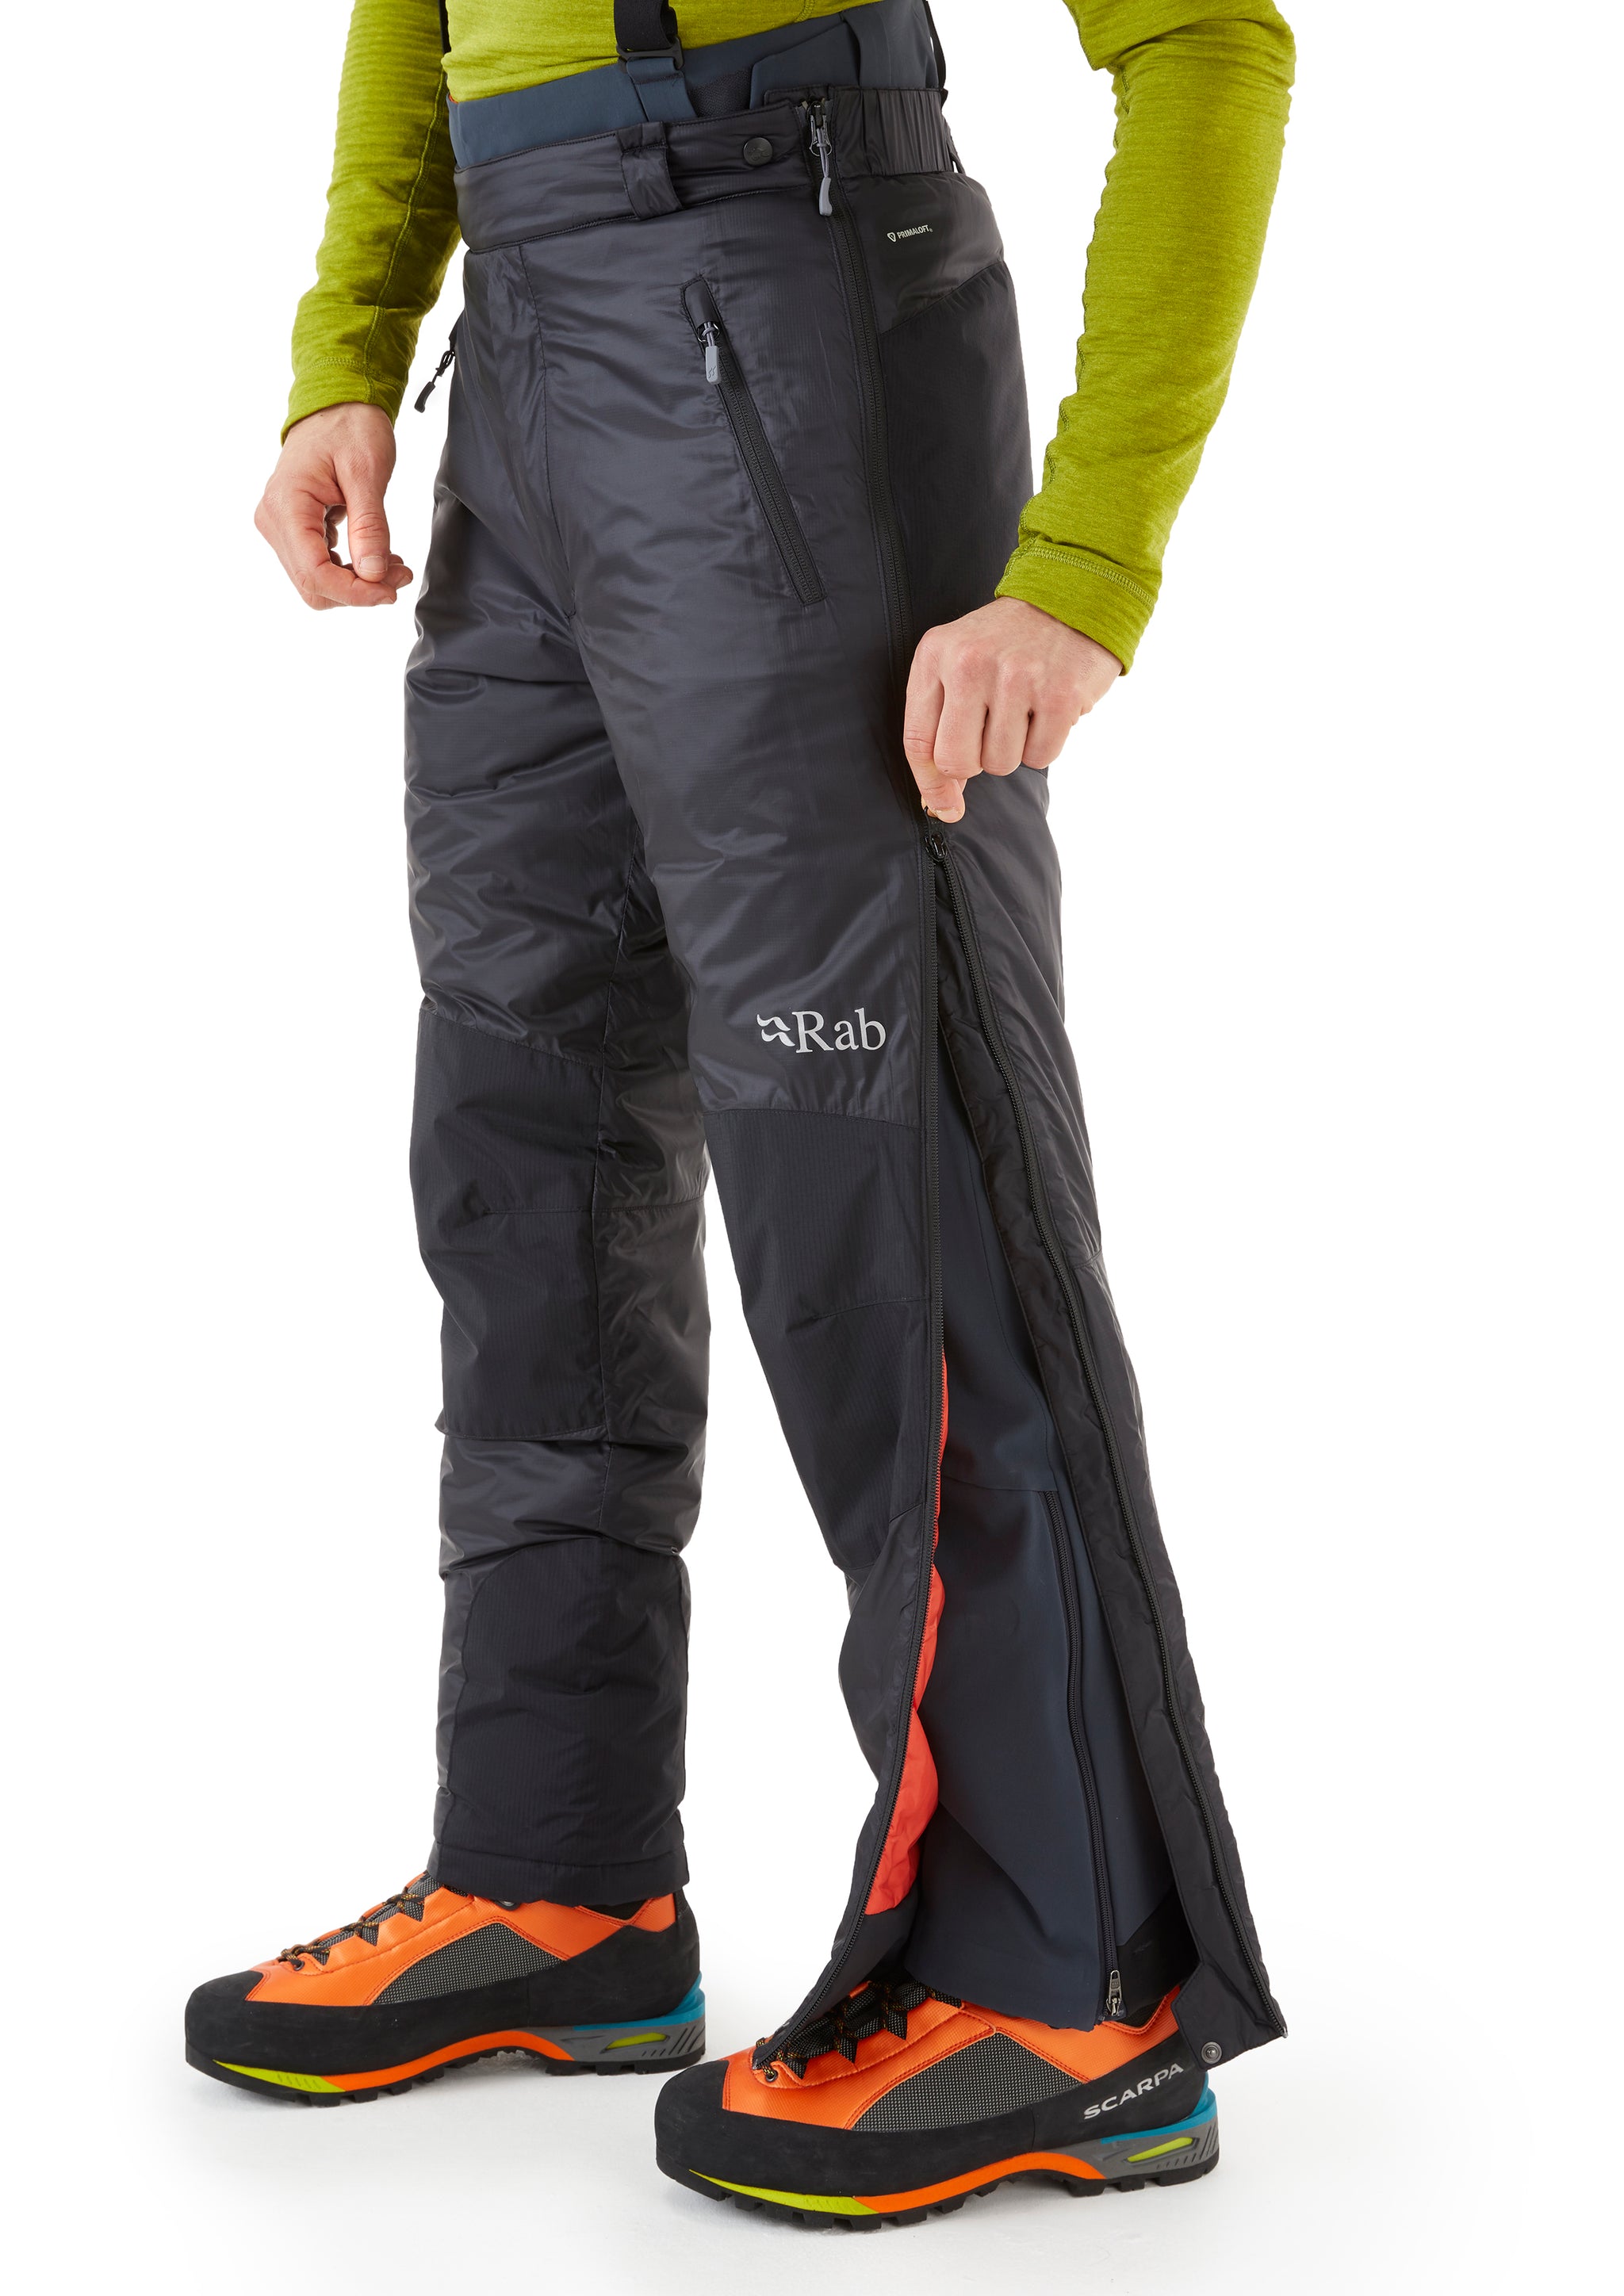 Rab Men's Photon Pants - Outfitters Store